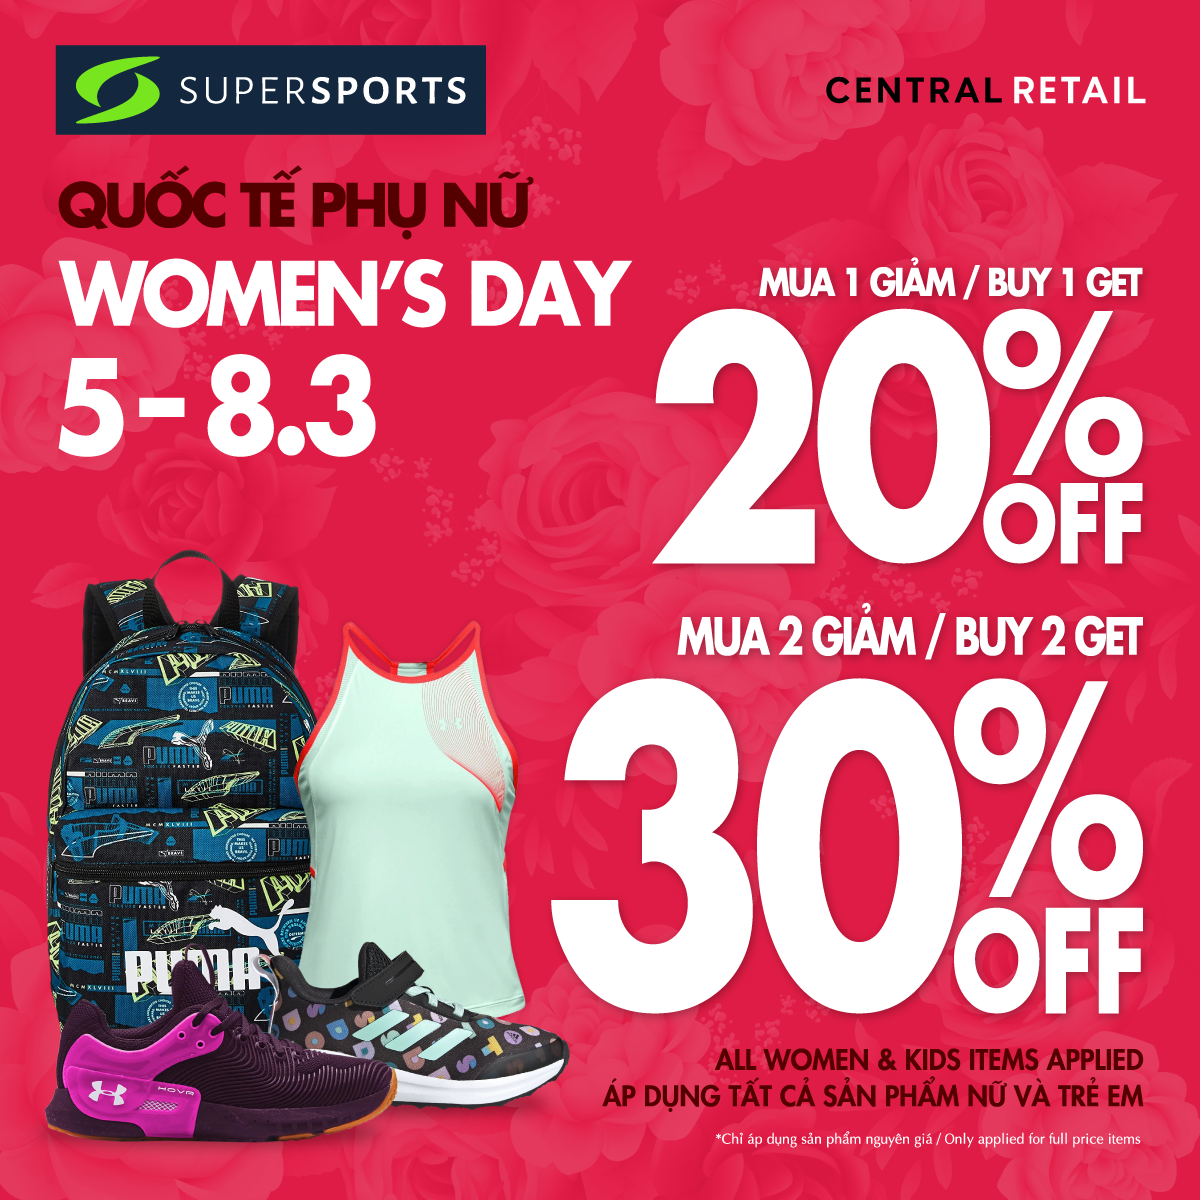 HAPPY WOMEN'S DAY 8/3🏃‍♀‍ SALE 30% AT SUPERSPORTS FROM 5-8/3🏃‍♀‍